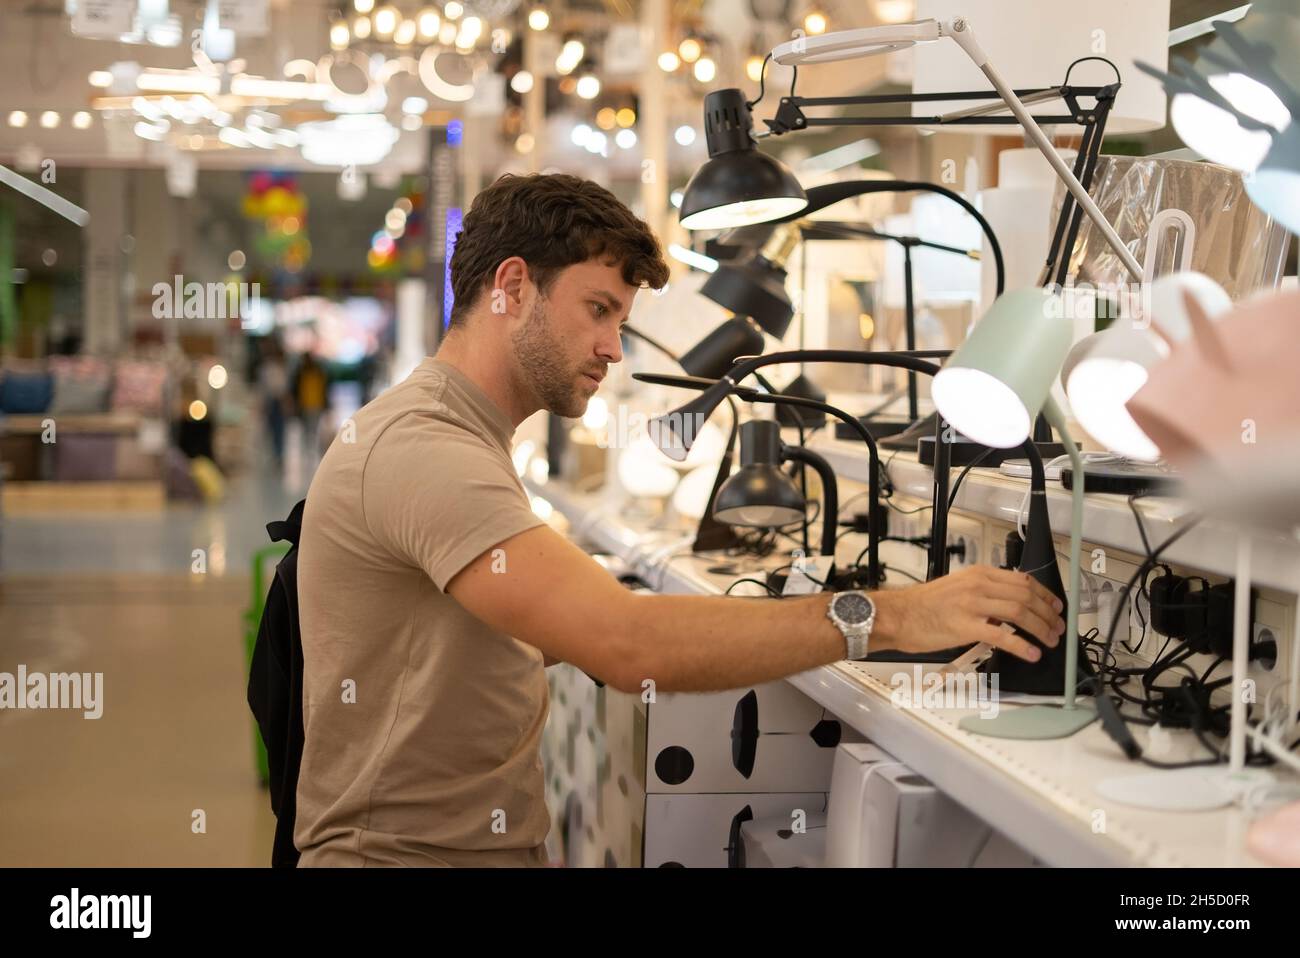 Side view of man in beige t shirt turning on and examining modern lamp while standing near shelf in shop Stock Photo